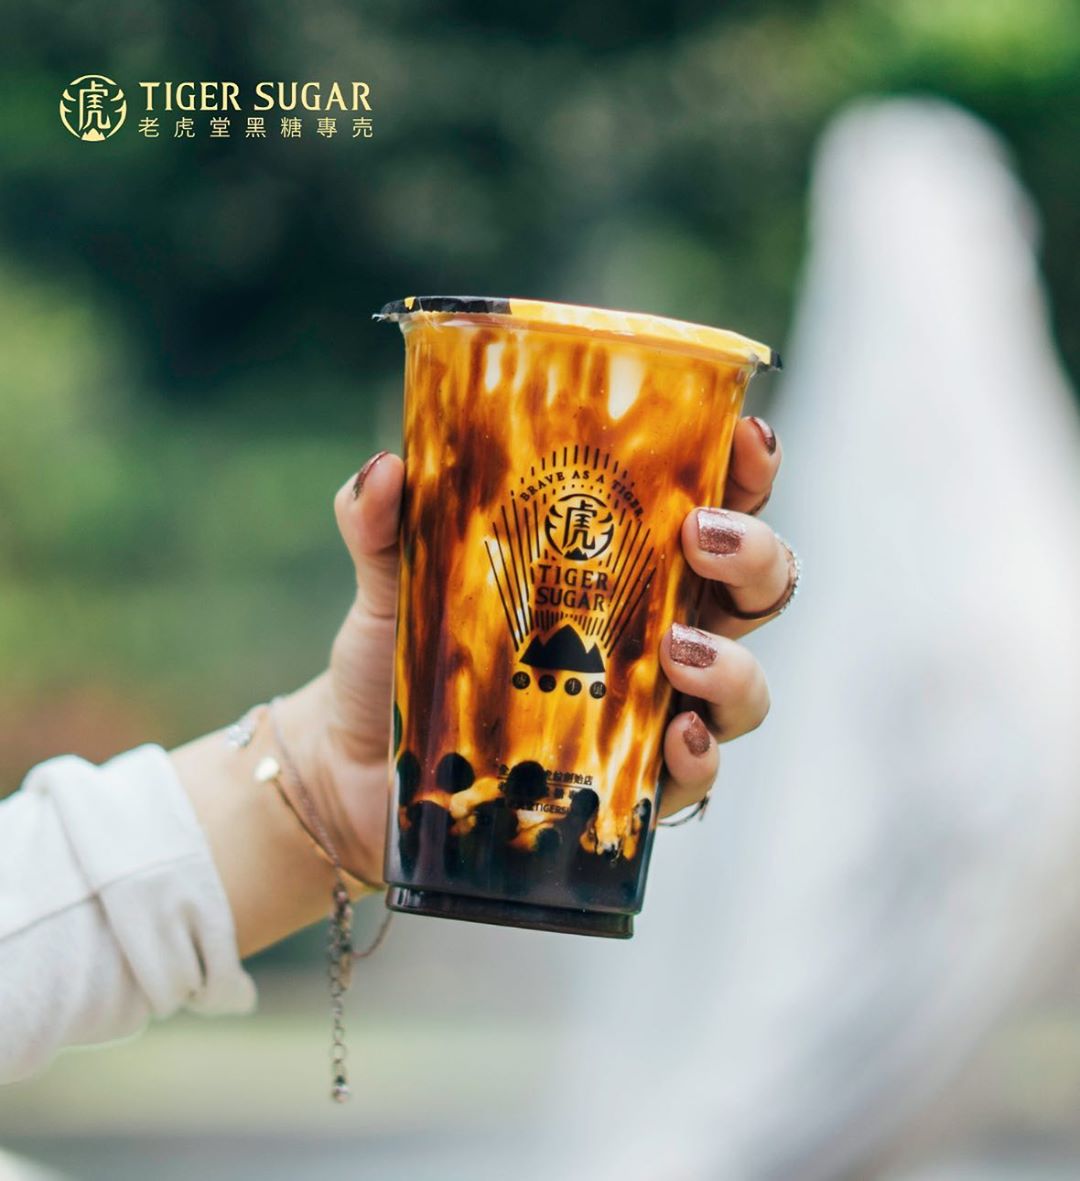 A drink from Tiger Sugar